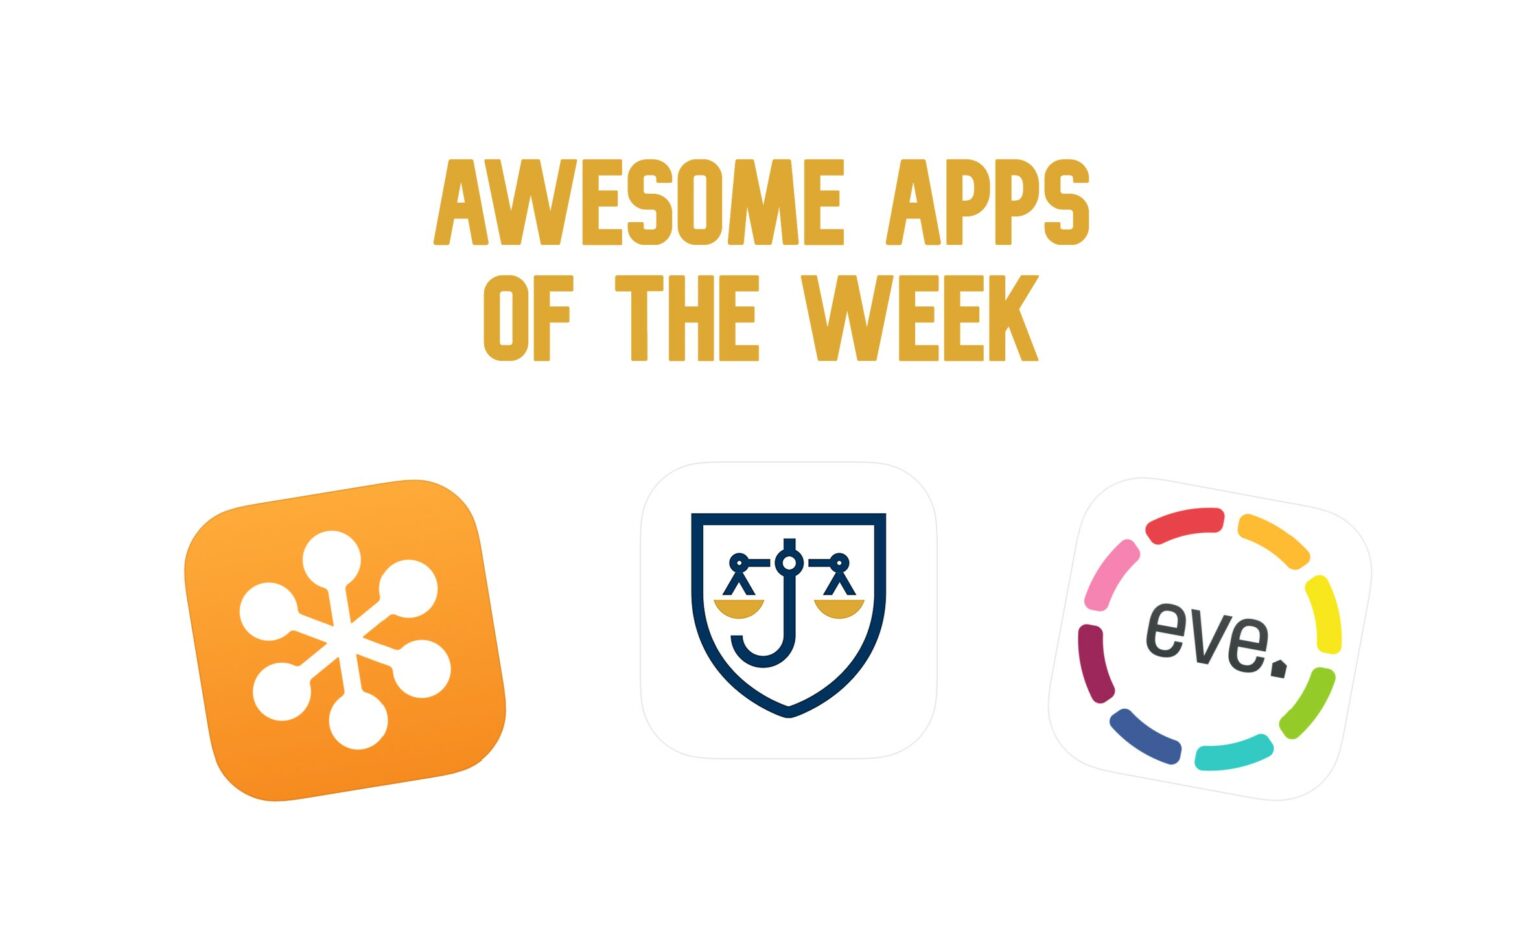 The best new apps and updates of the week.